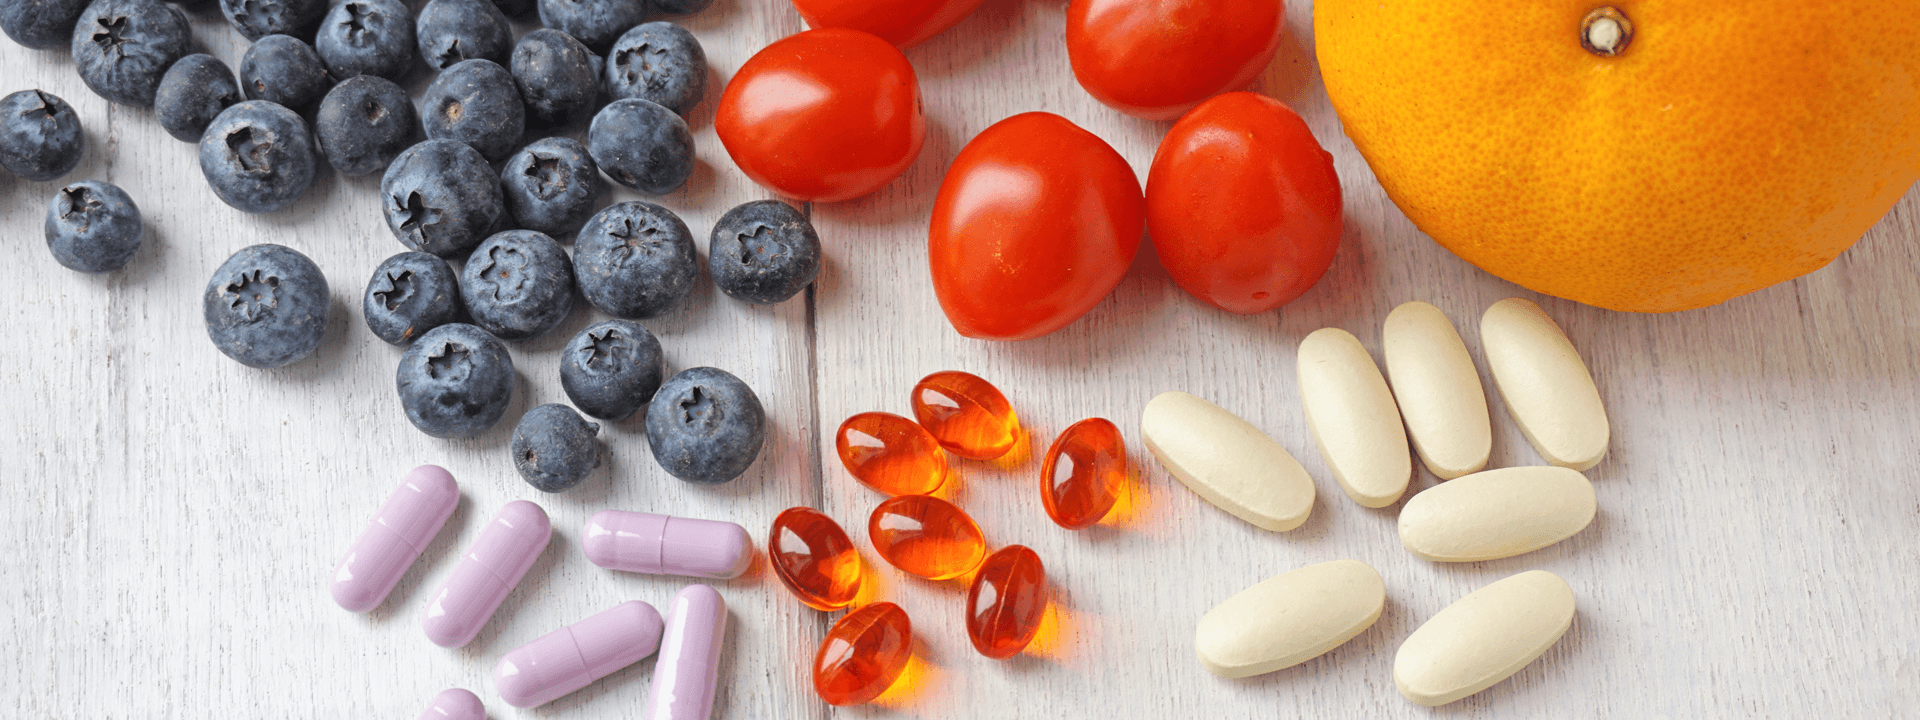 Whole Food Supplements or Synthetics?